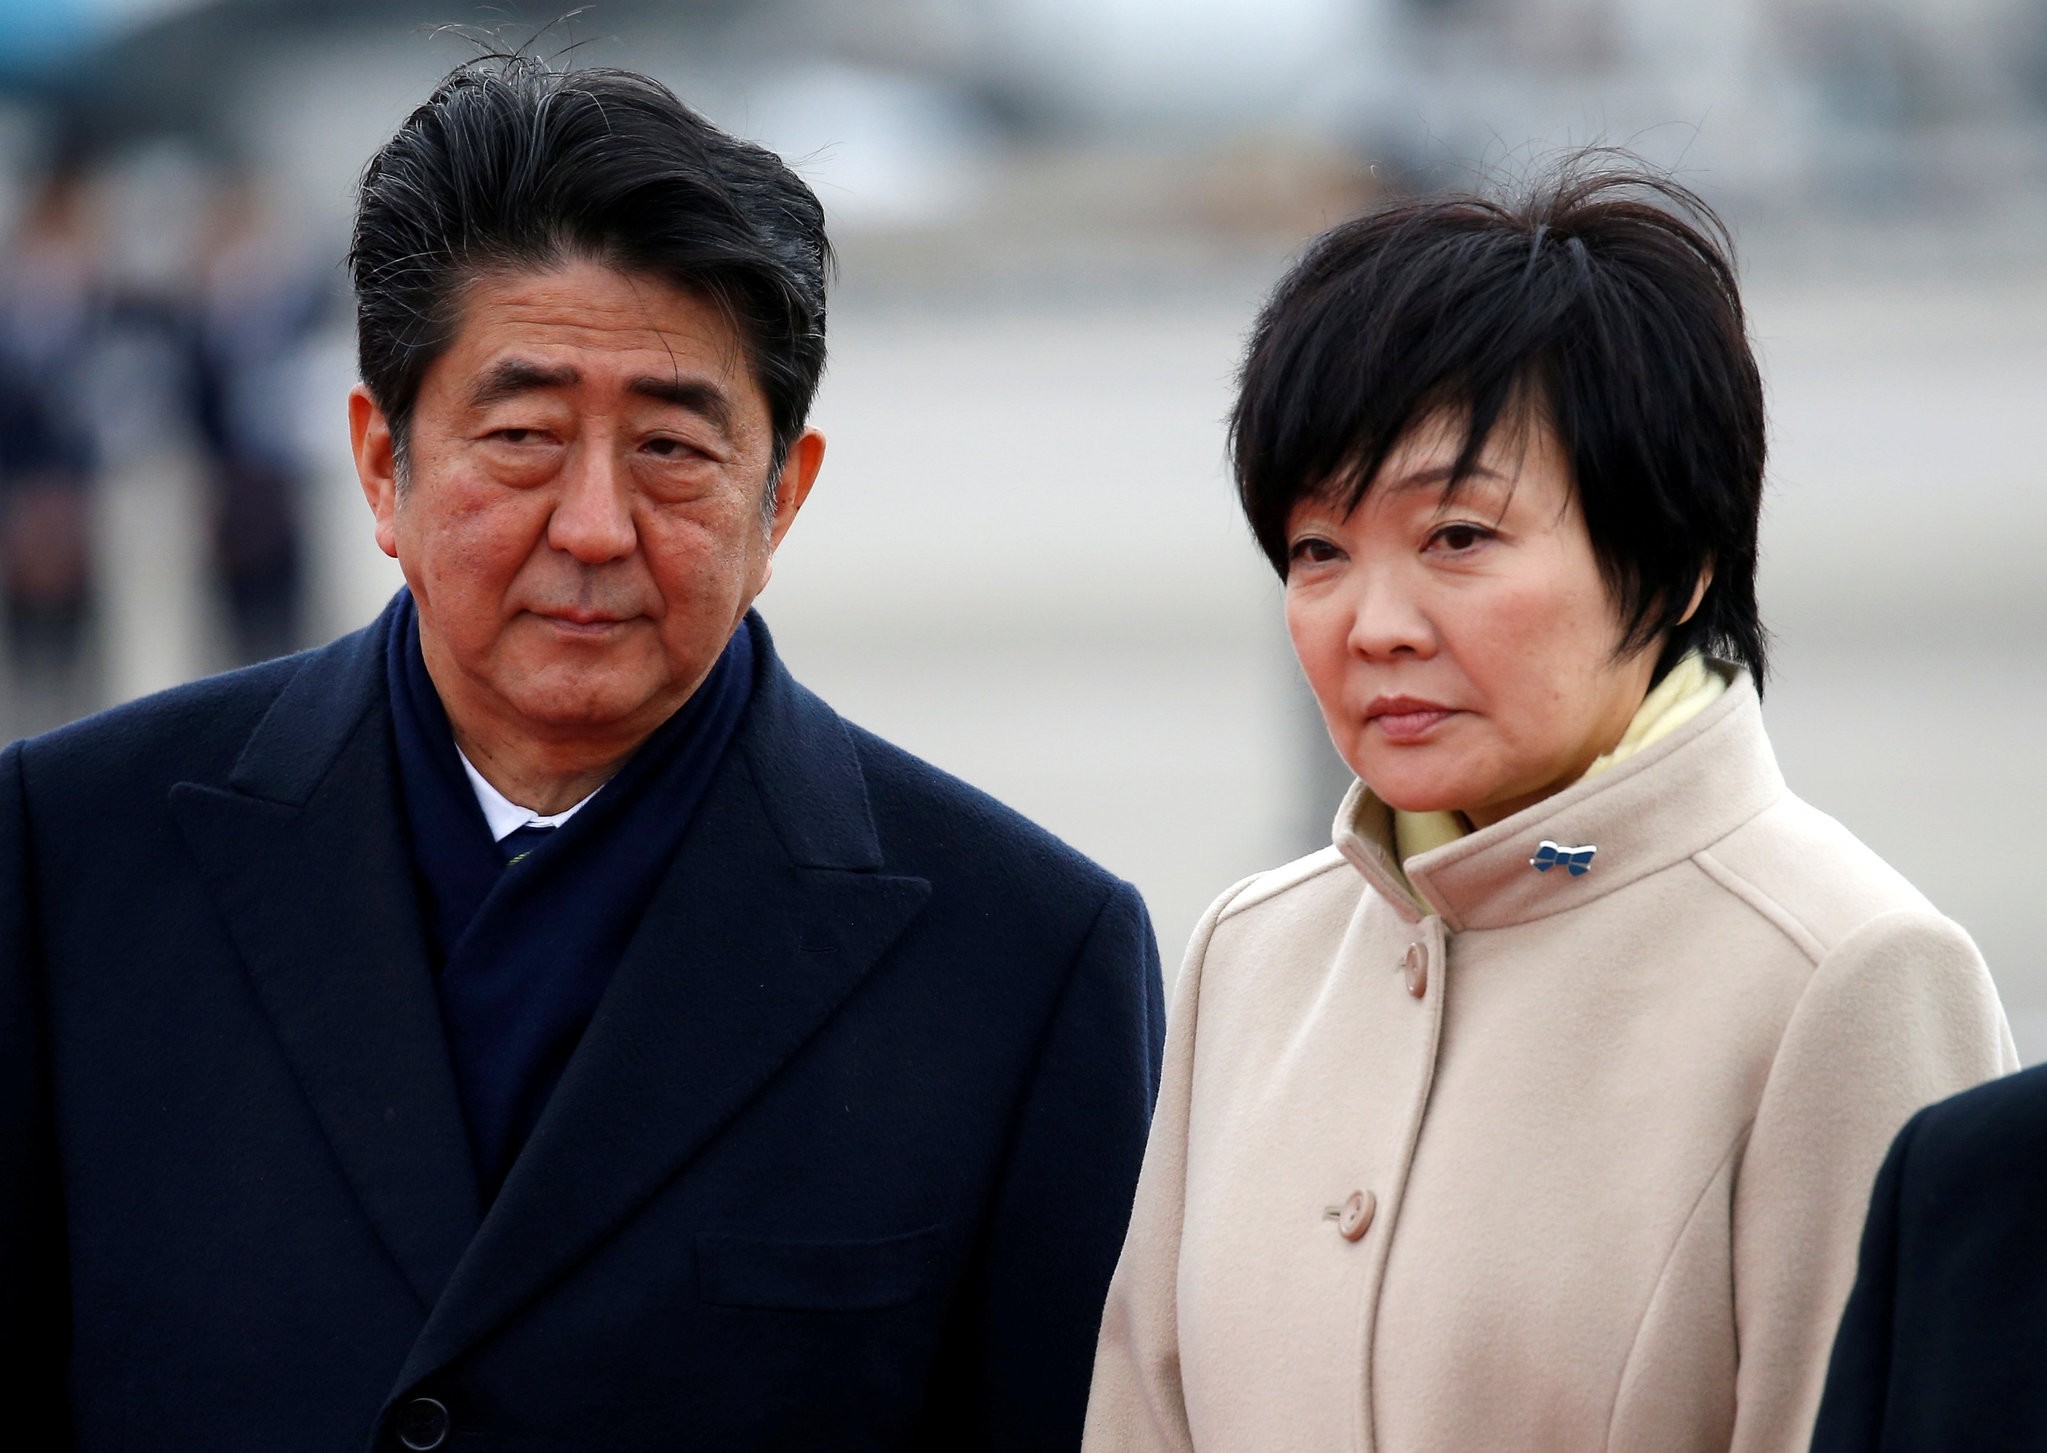 Japan's Prime Minister Shinzo Abe (L) and his wife Akie at Haneda Airport in Tokyo, Japan February 28, 2017. (REUTERS Photo)